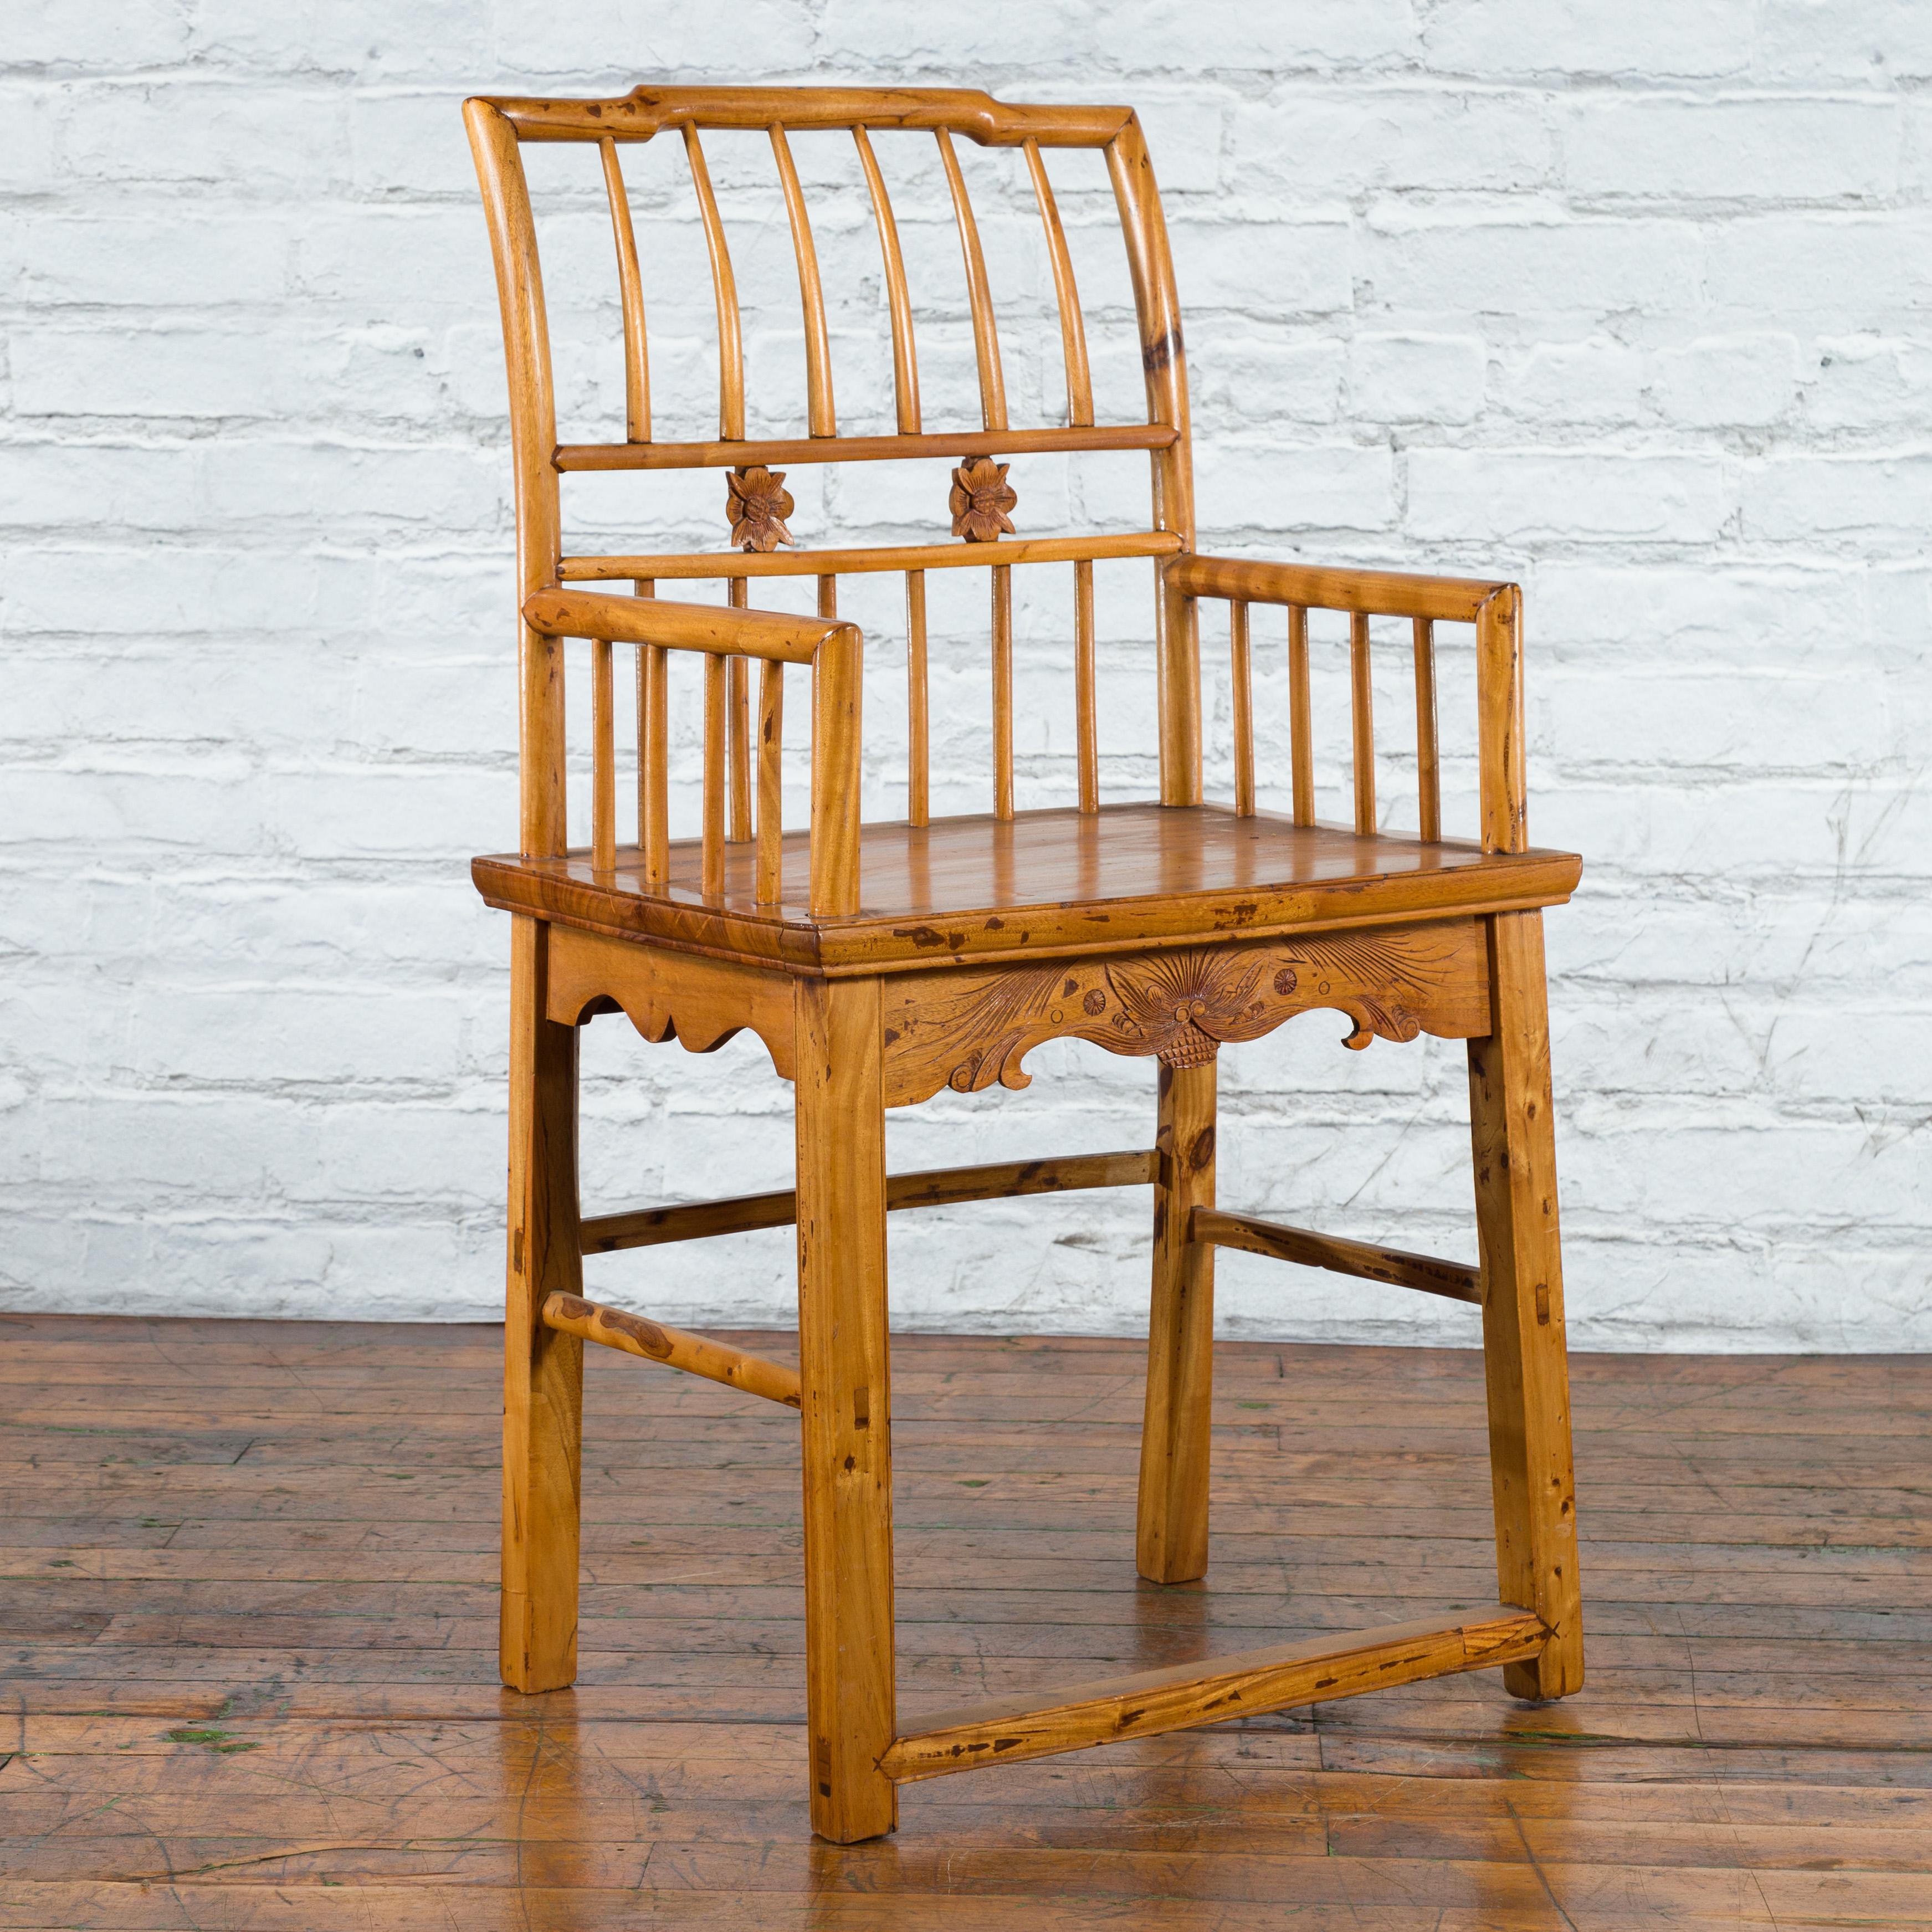 Chinese Qing Dynasty Period 19th Century Elmwood Armchair with Hand-Carved Apron For Sale 4